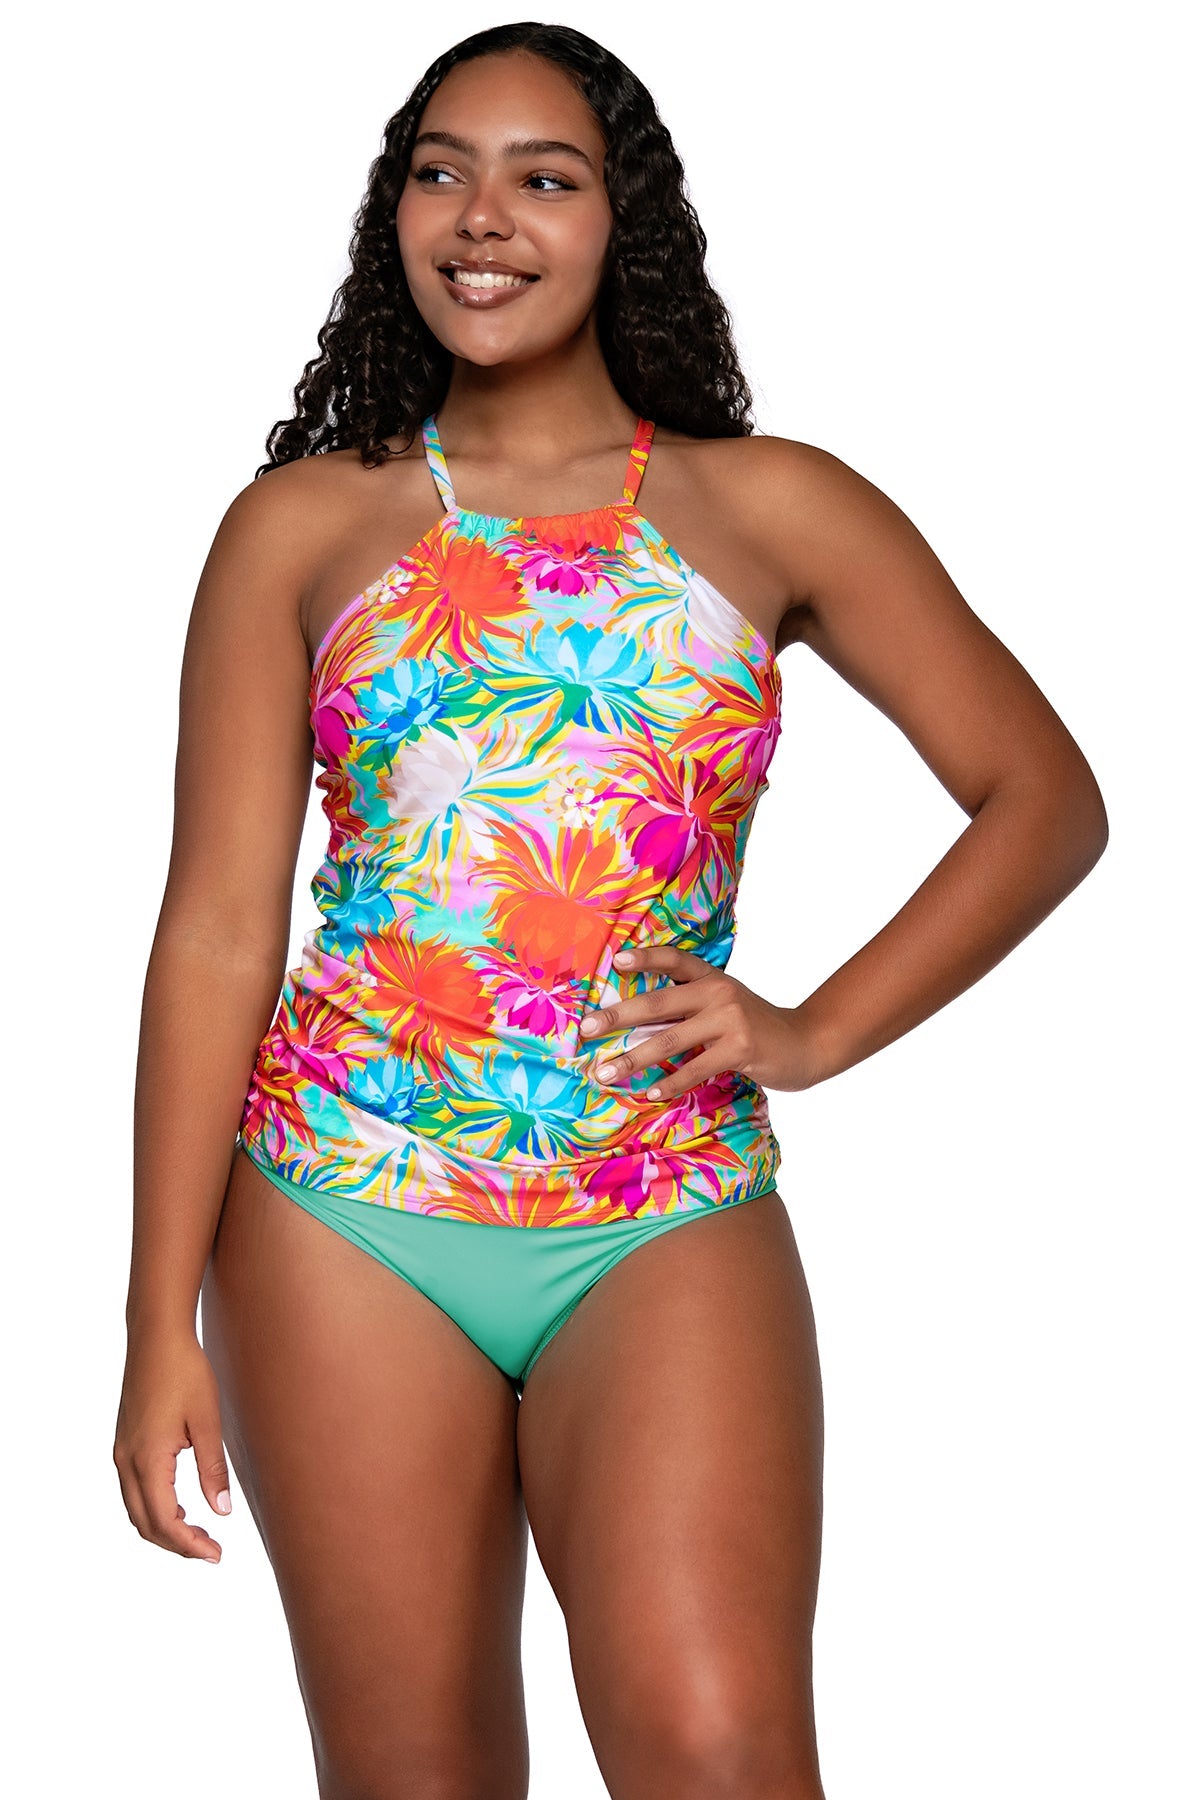 Simone Tankini by Sunsets - WalterGreenBoutique